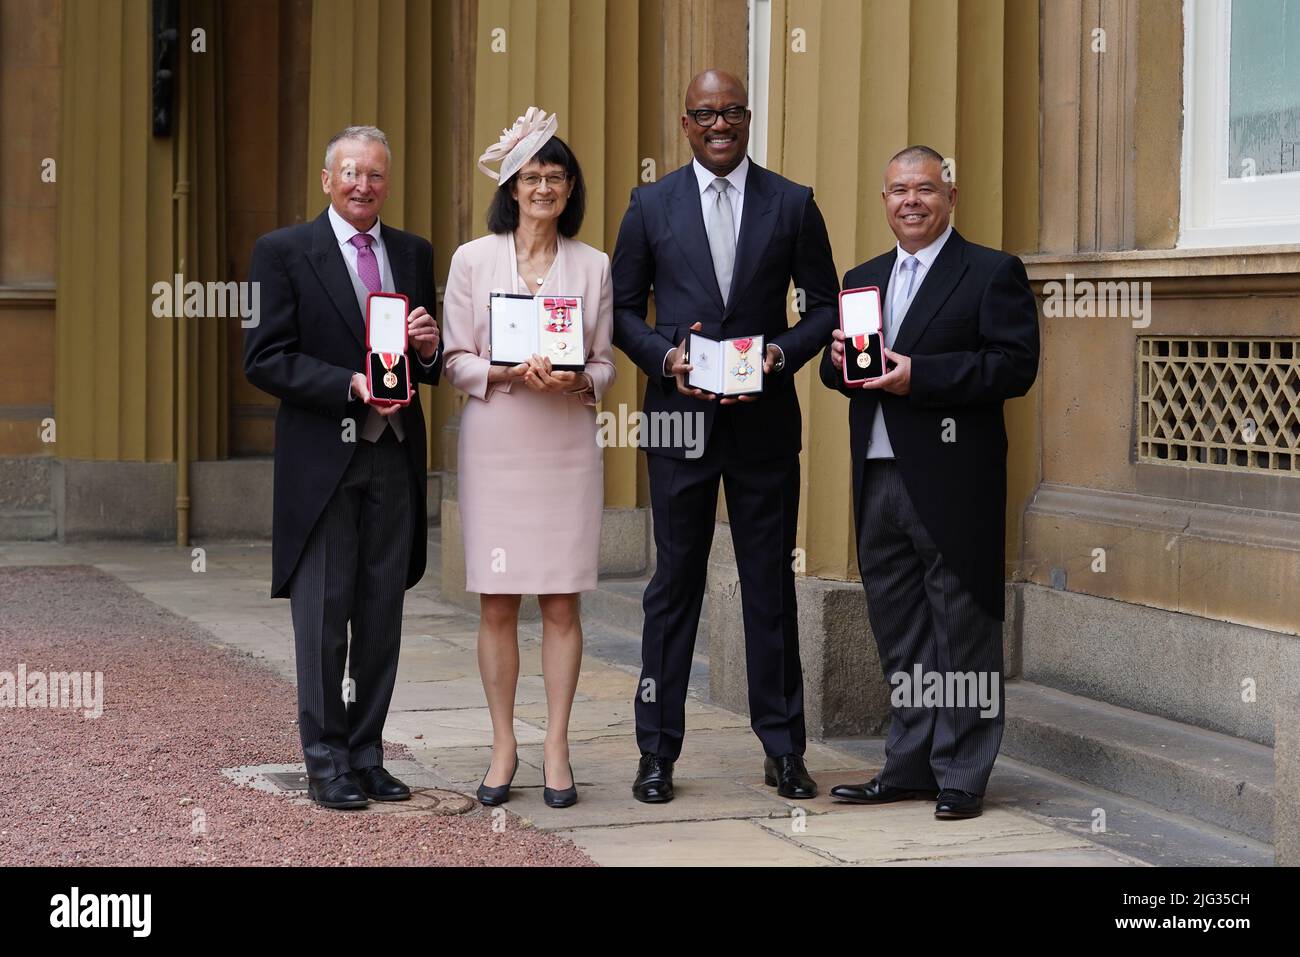 (left to right) Sir Paul Nurse, Companion of Honour, Professor Dame Jennifer Harries, Dame Commander of the British Empire, Professor Kevin Fenton CBE, and Professor Sir Jonathan Nguyen-Van-Tam, Knight Bachelor, with their honours following an investiture ceremony at Buckingham Palace in London. Picture date: Thursday July 7, 2022. Stock Photo